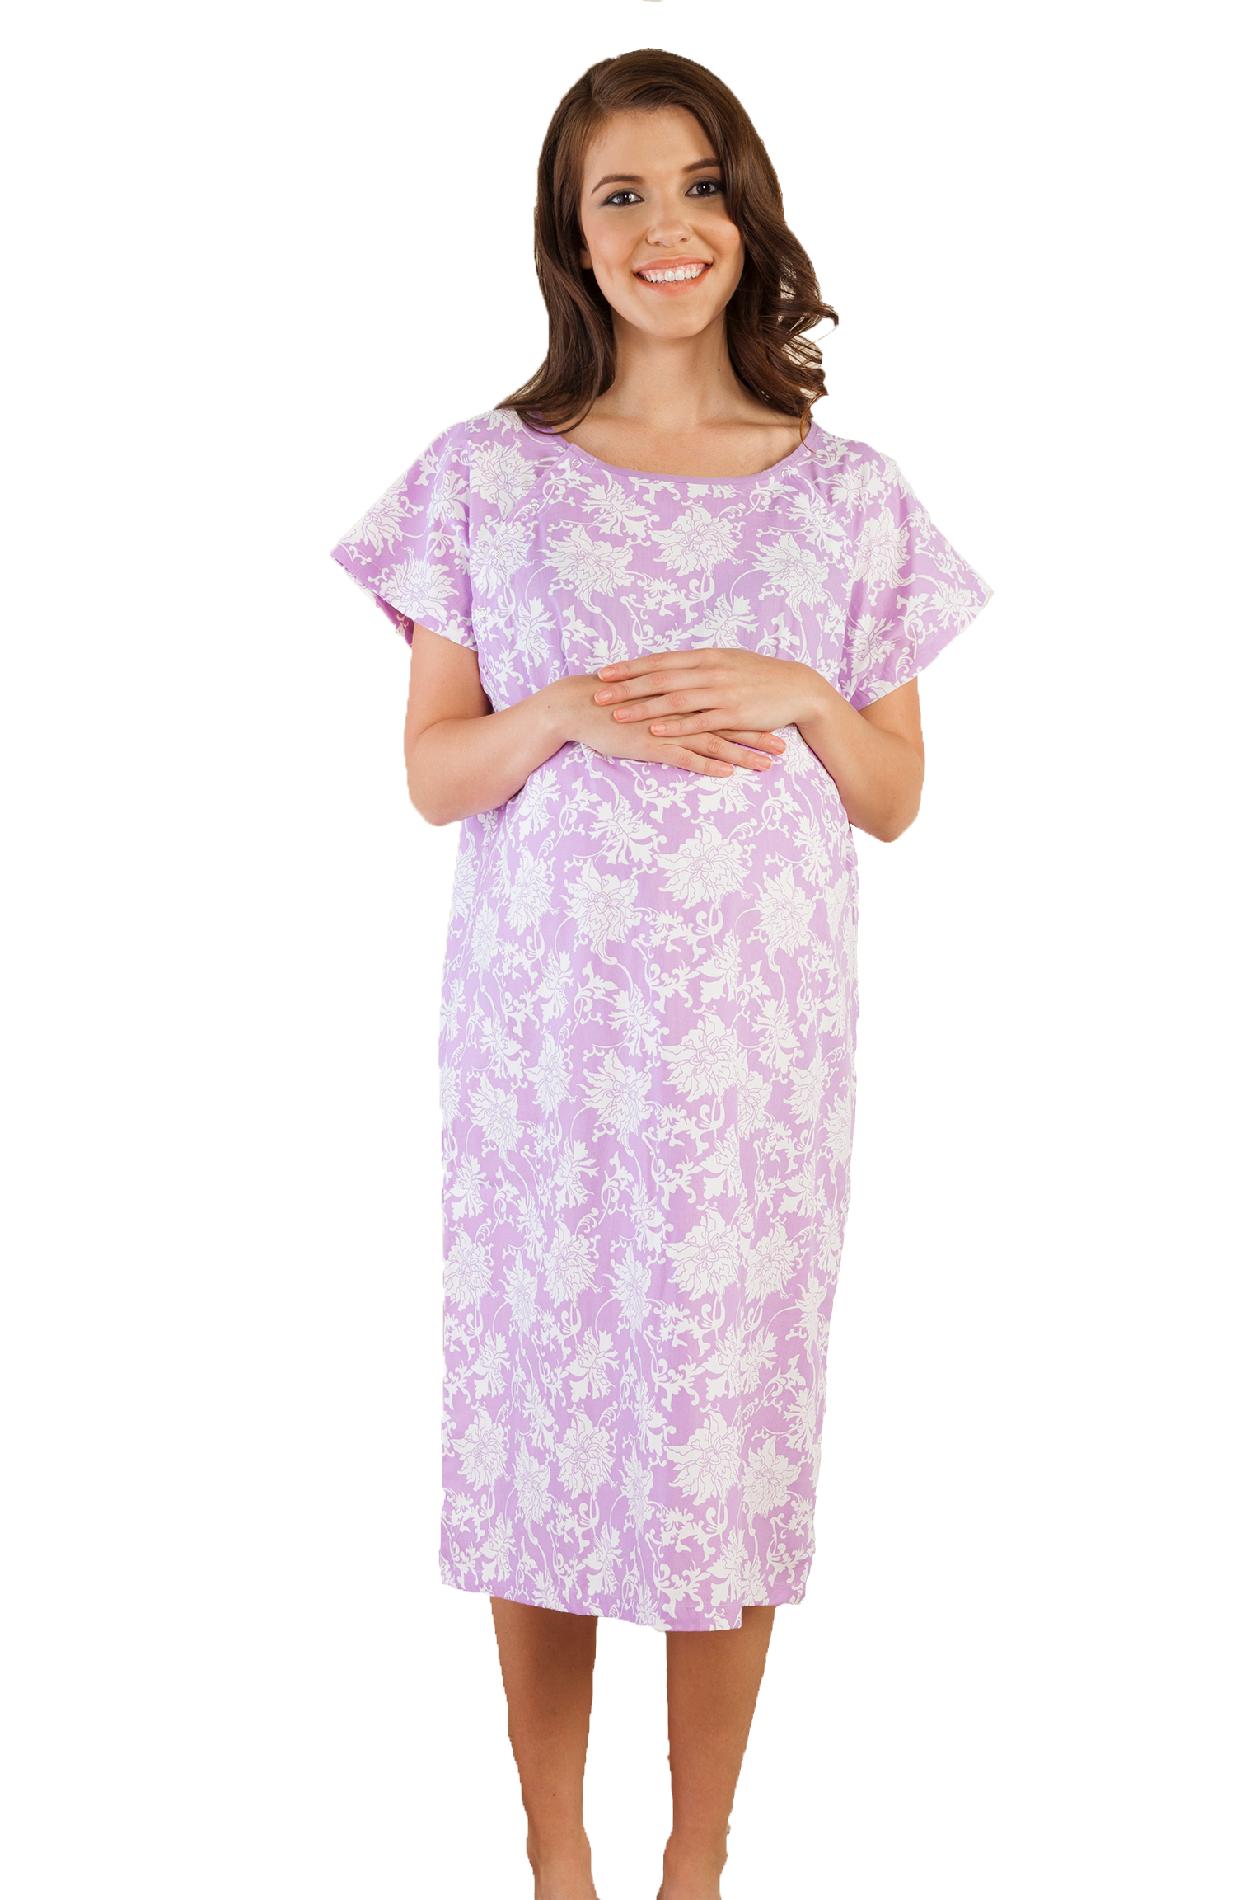 Helen Gownie Hospital Gown with Pillowcase